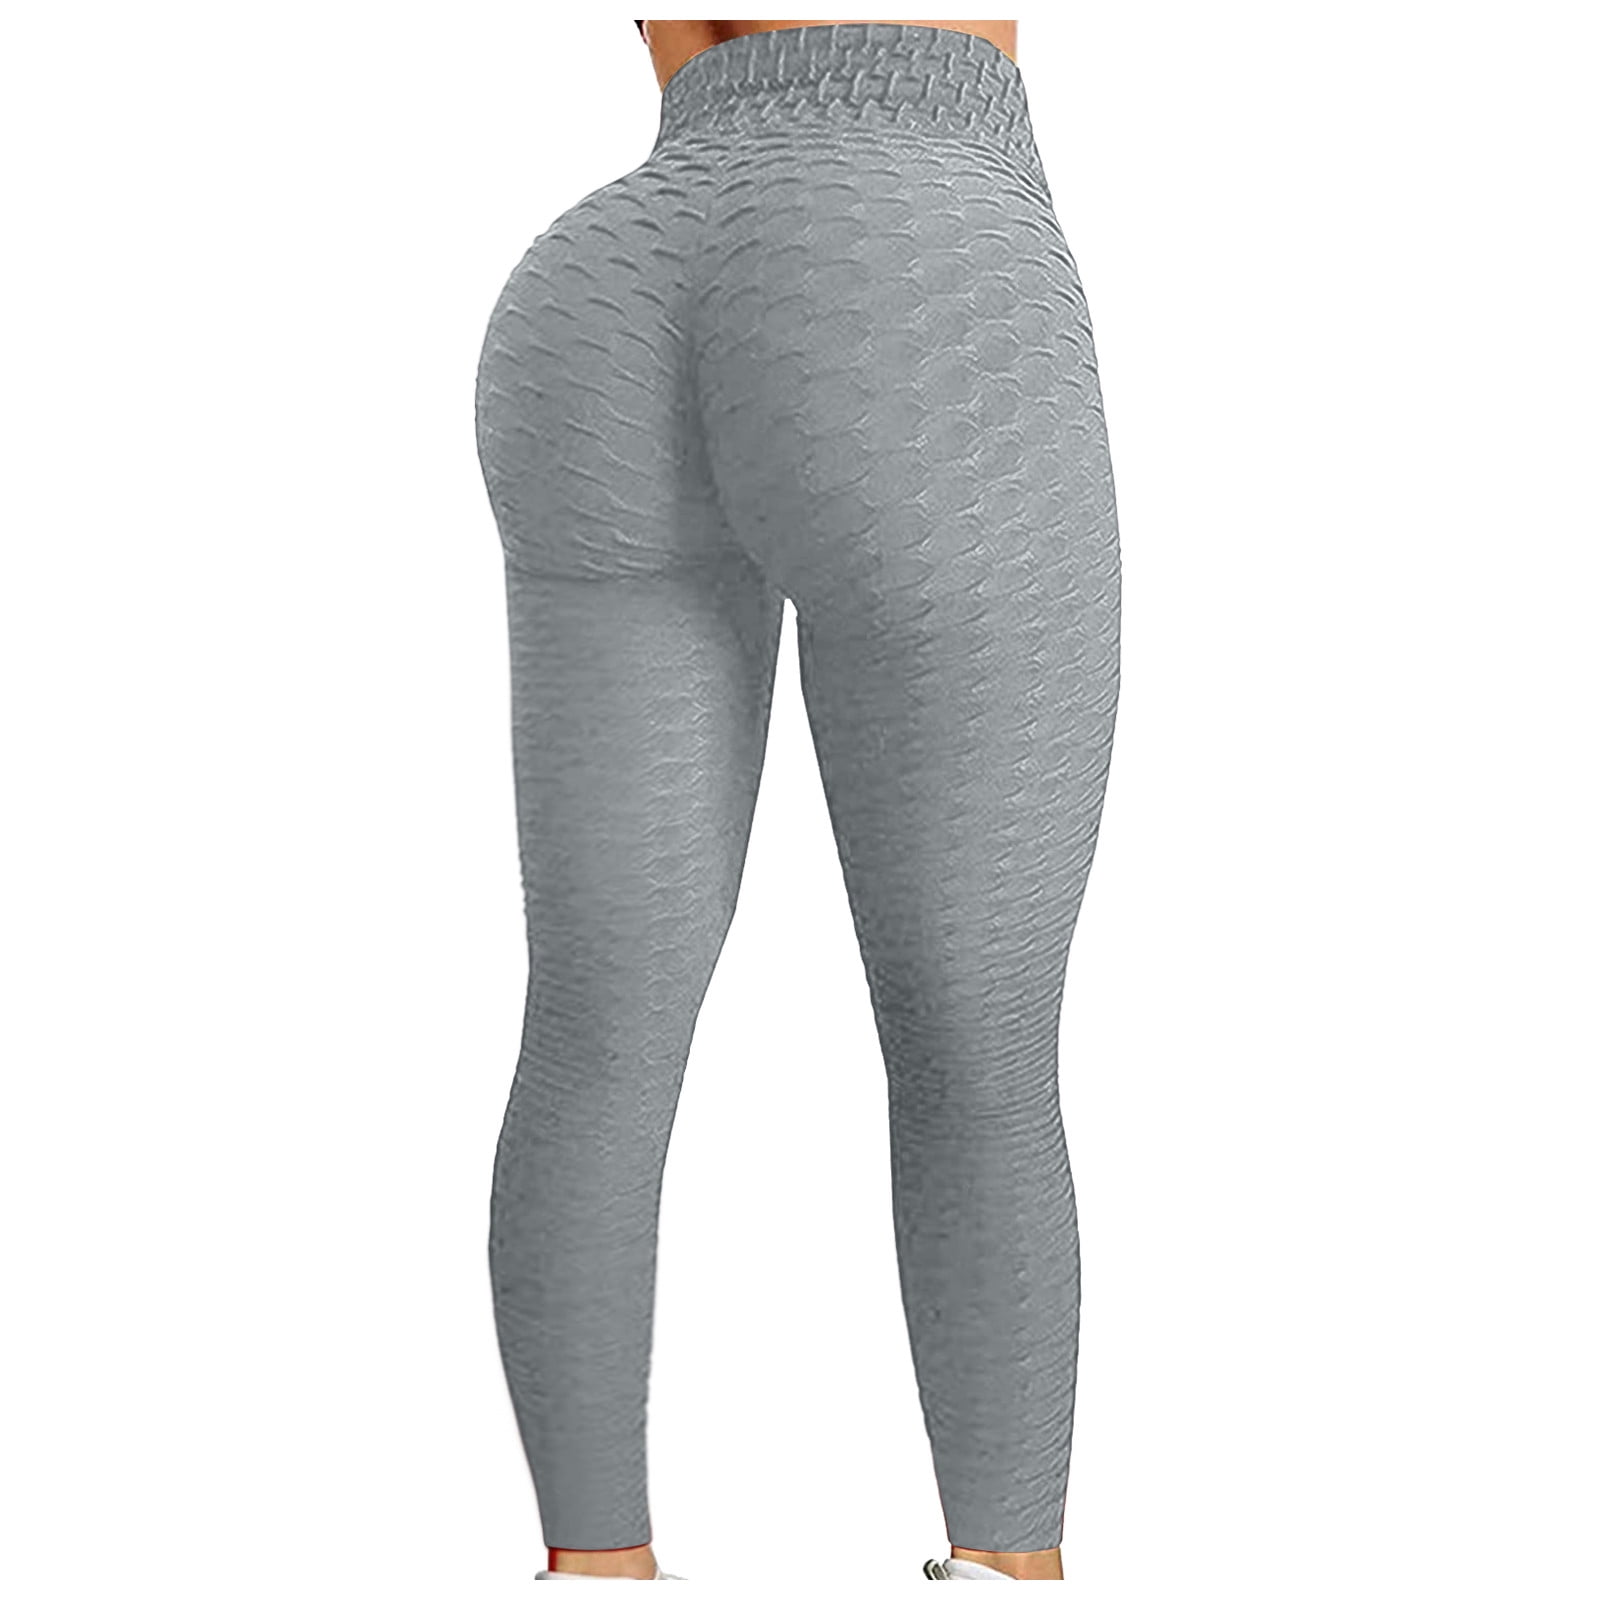  Kcocoo Womens Leggings-No See-Through High Waisted Tummy  Control Yoga Pants Workout Running Leggings Super Soft Tights Pants(Dark  Gray,S) : Sports & Outdoors